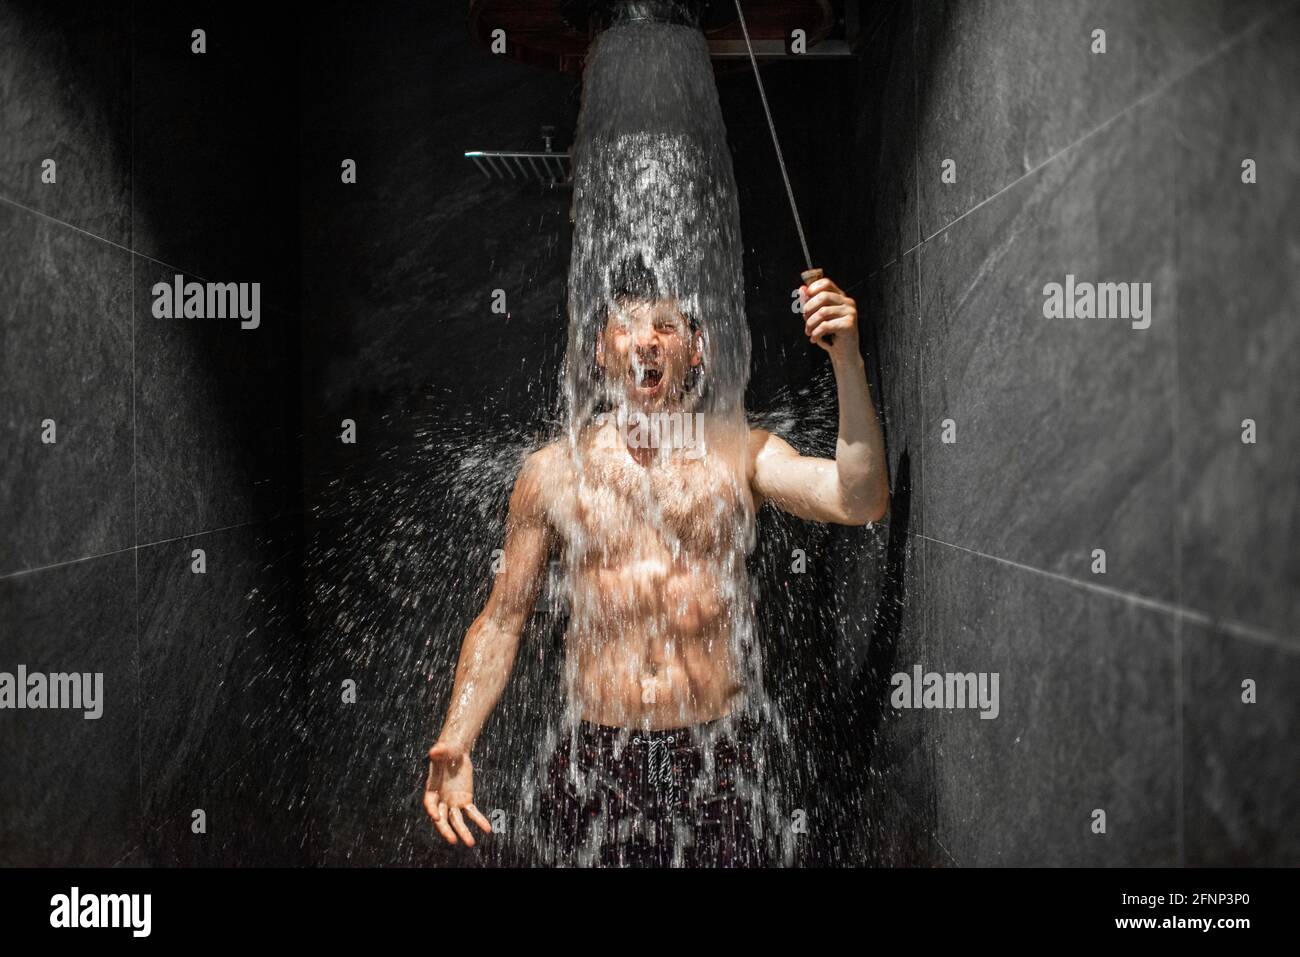 Outdoor shower and cold water bucket in a spa Stock Photo - Alamy